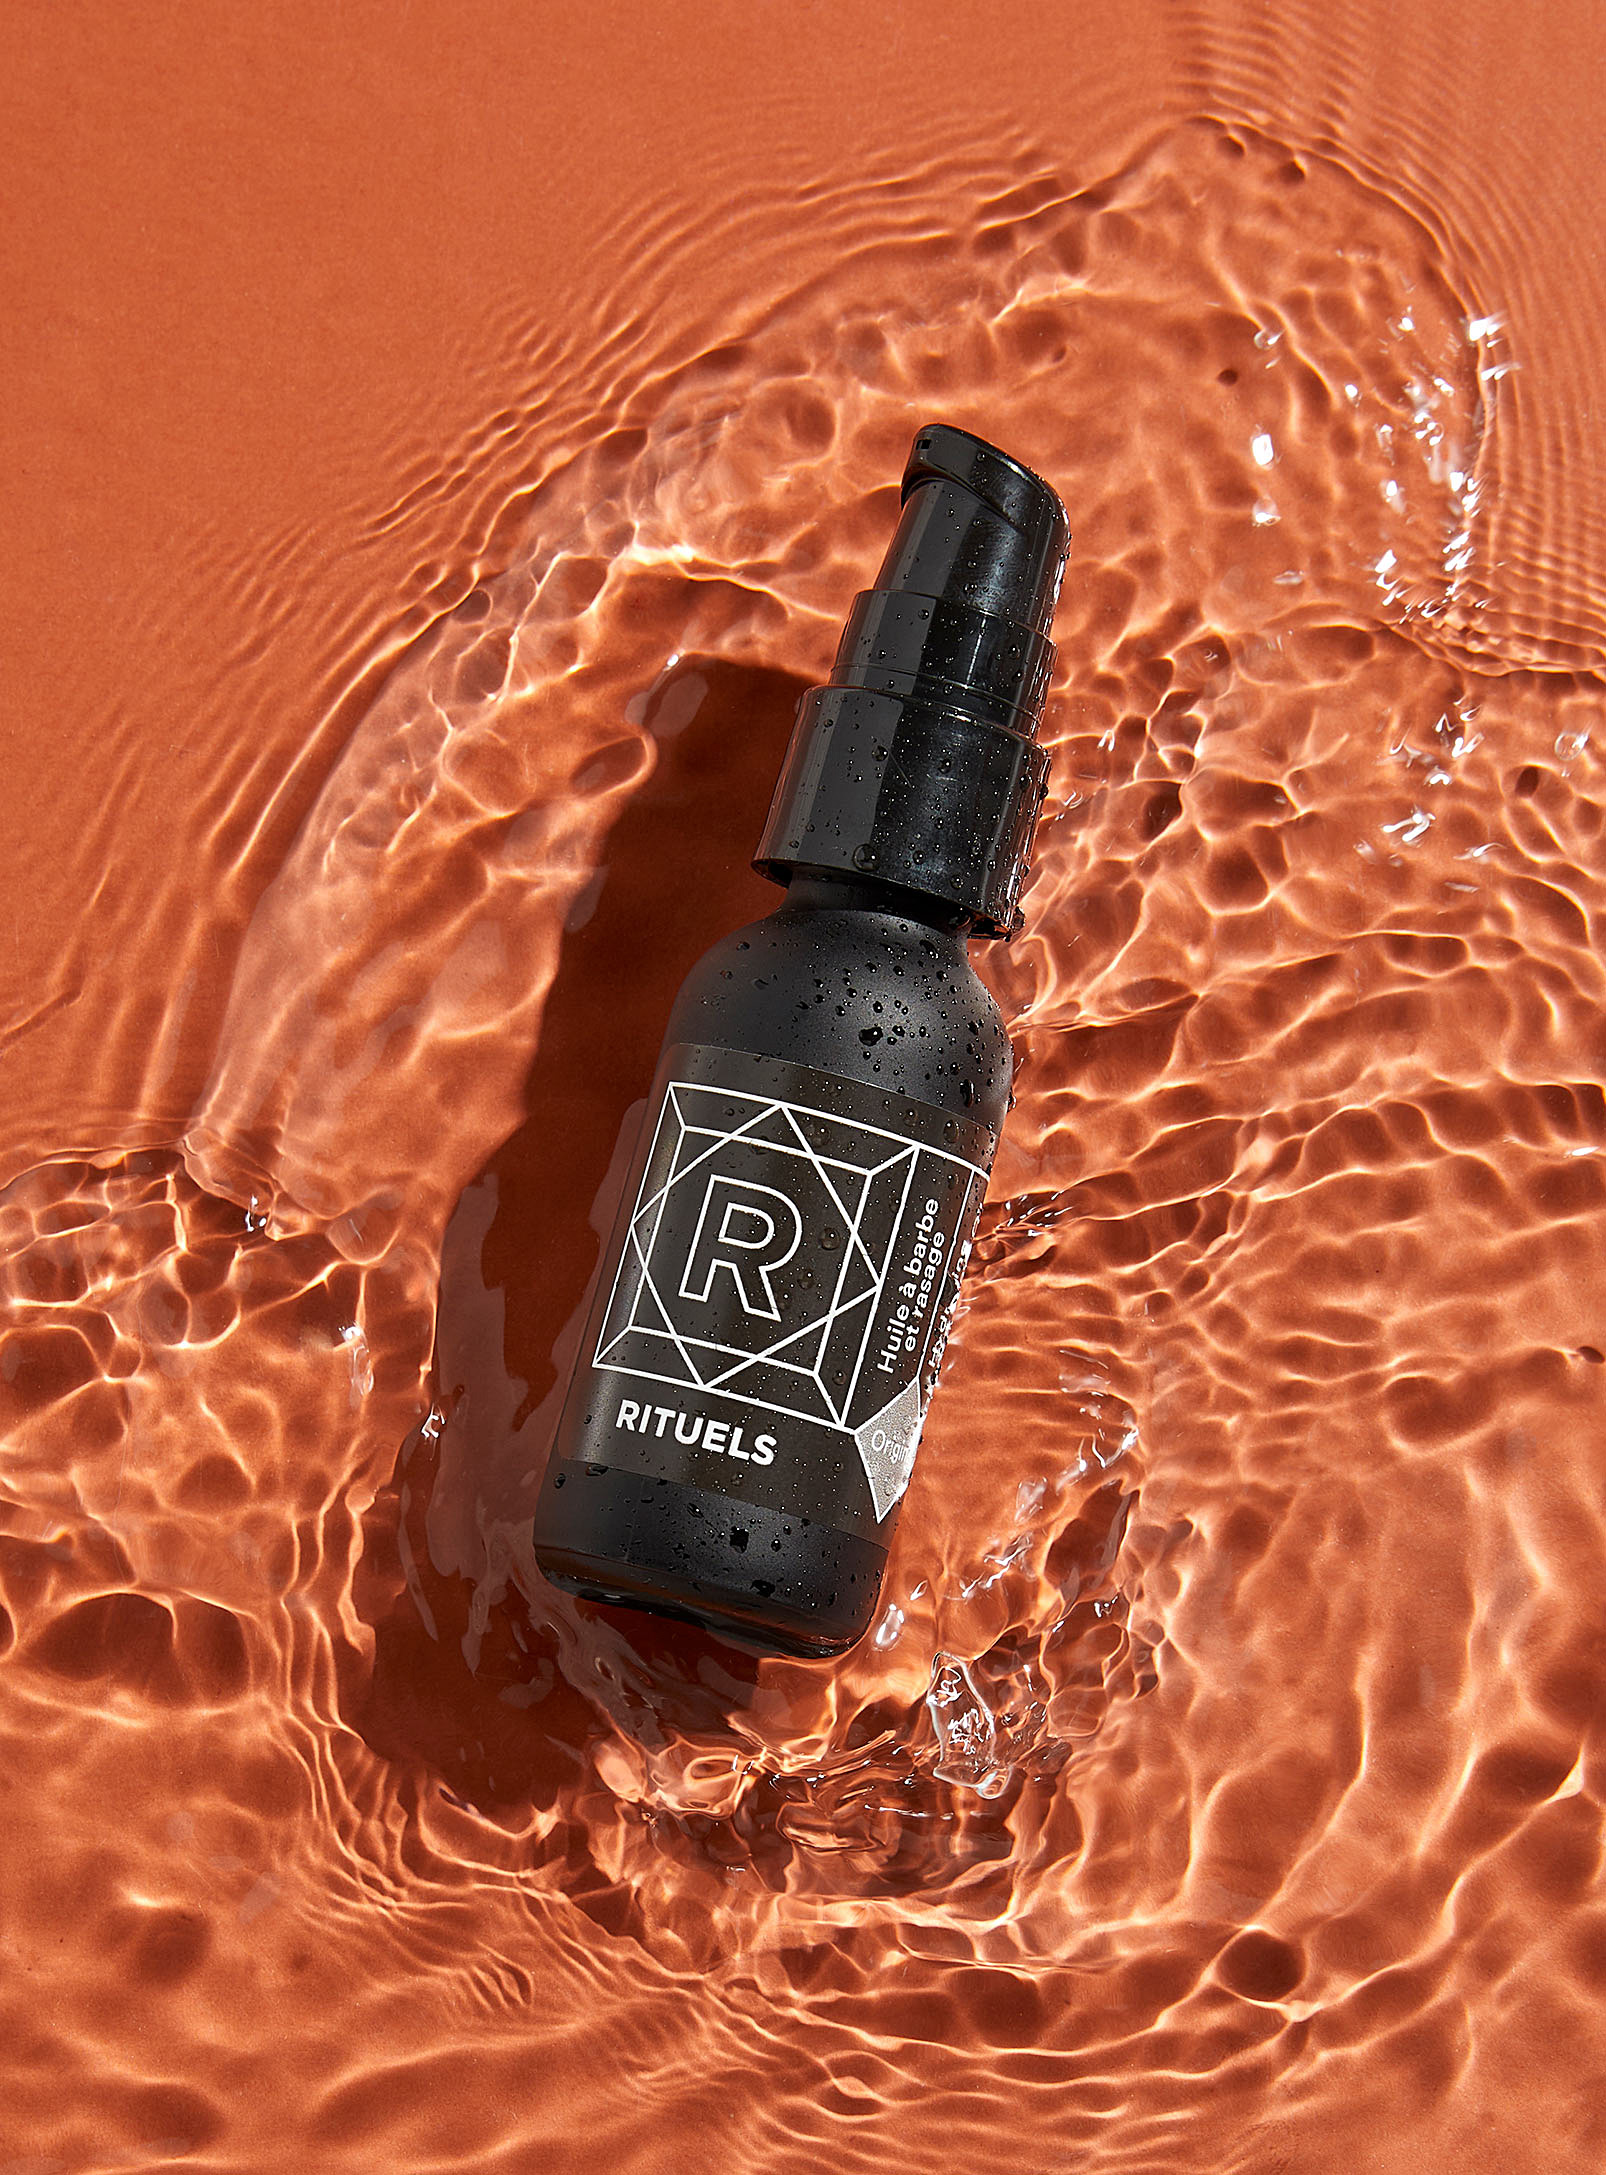 Rituels - Hydrating beard and shave oil